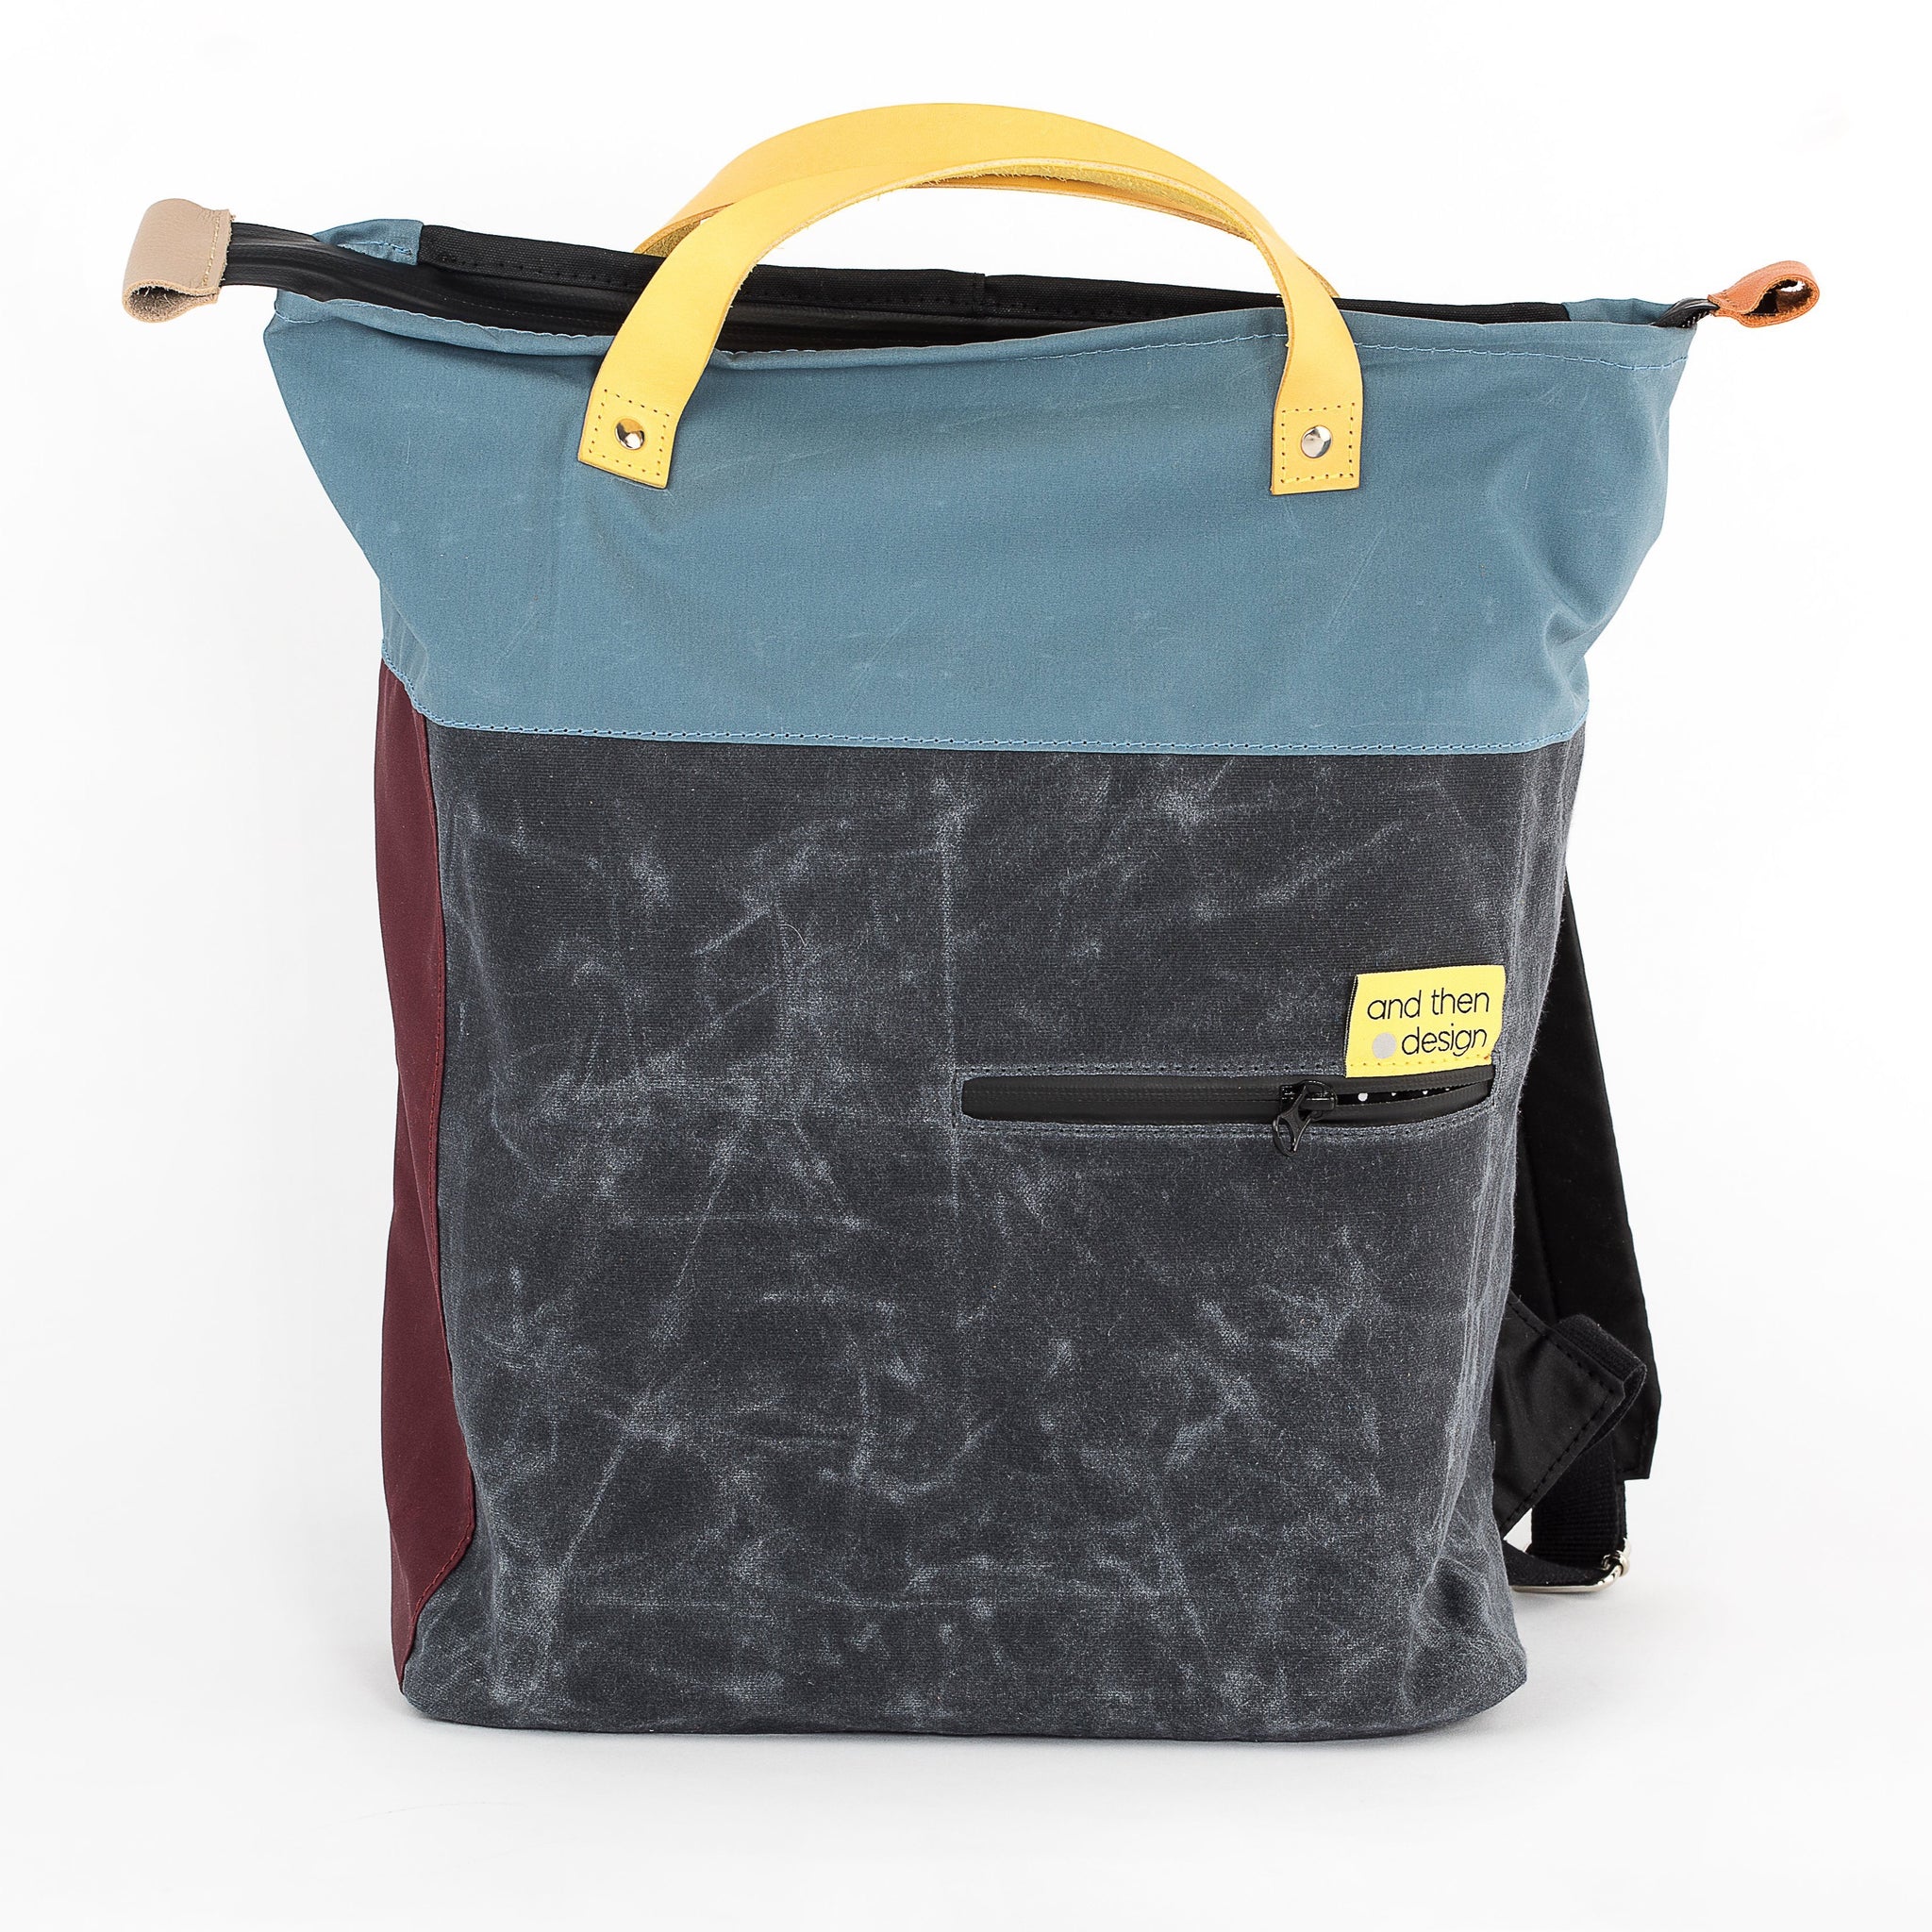 andthen.design an evolution of Vel-Oh.com-Dave | Backpack zero-1 waxed cotton backpack, colourblock backpack, colorblock backpack, zero waste backpack, handmade using off cuts, odd straps